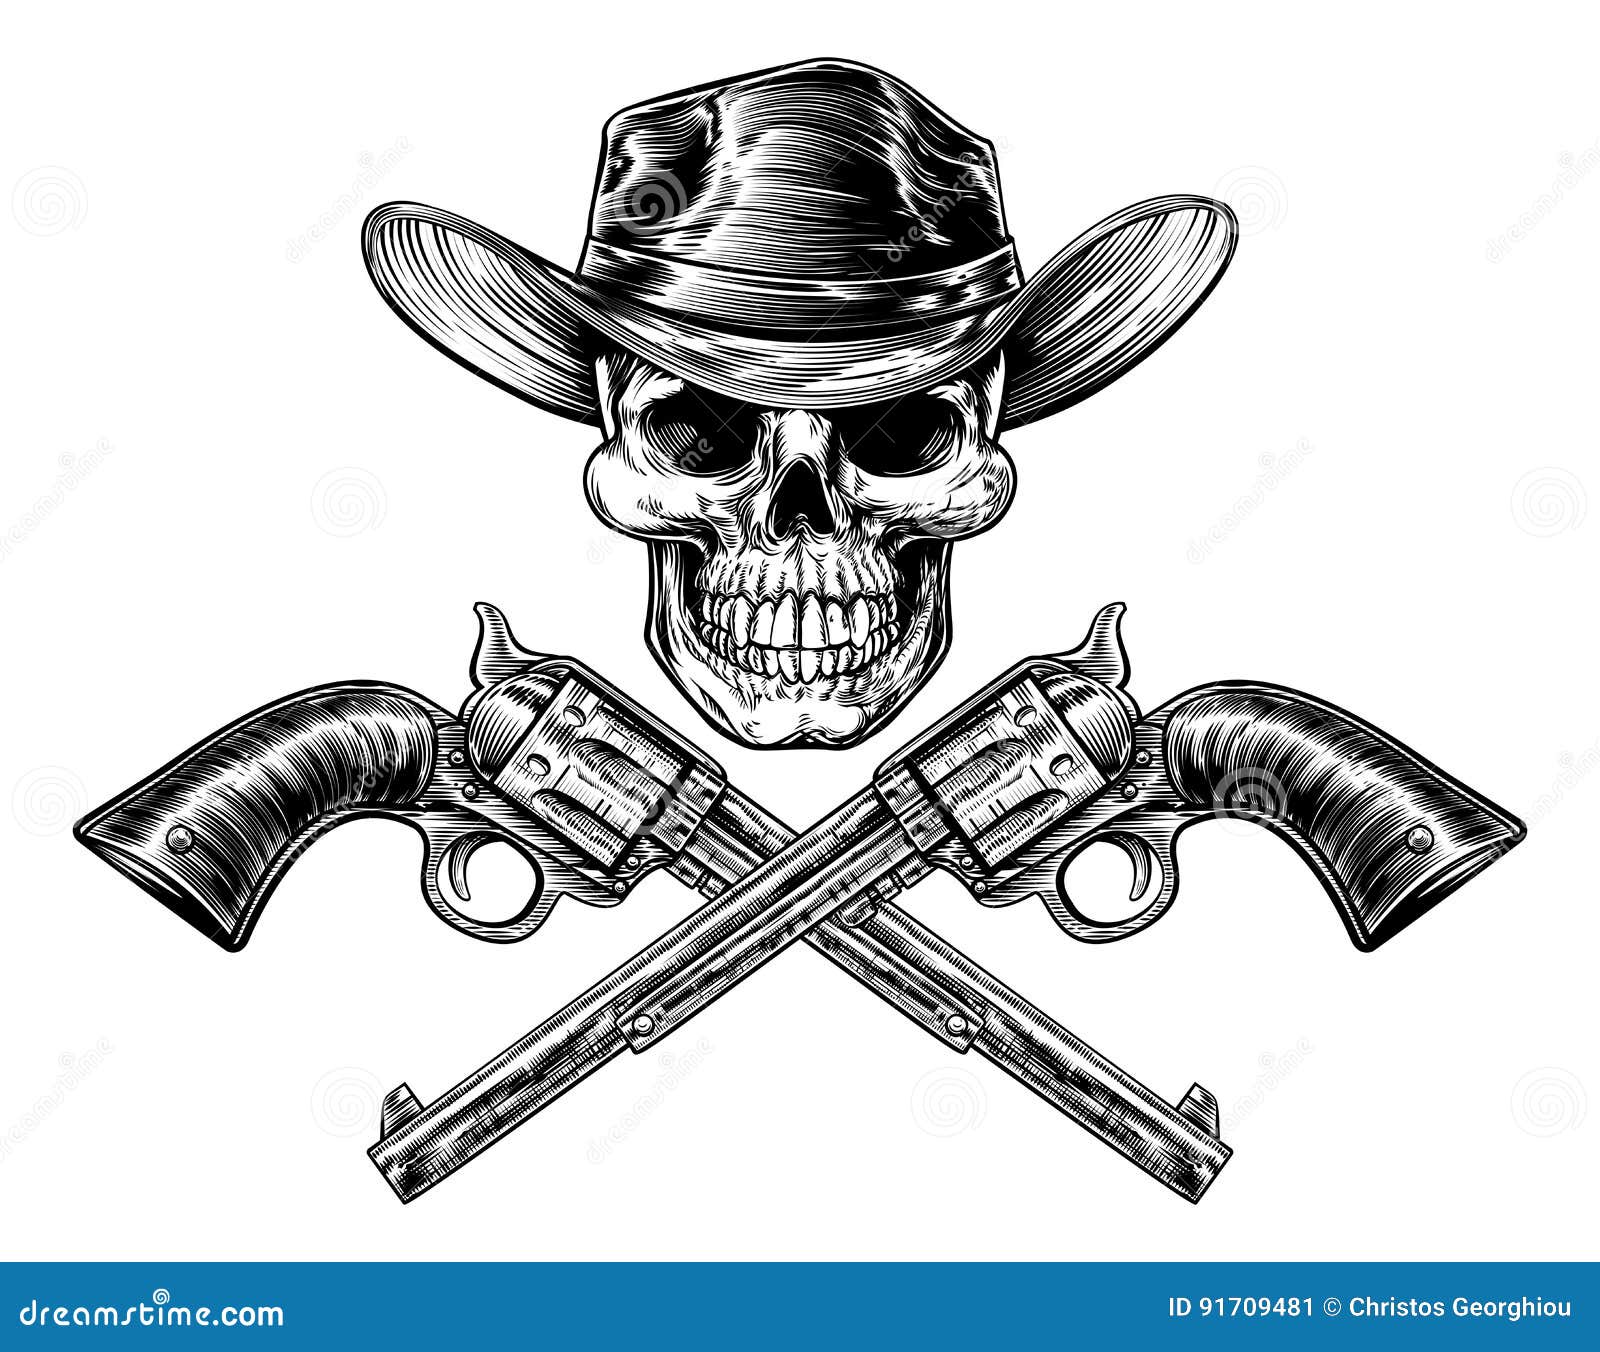 Pistols Cartoons, Illustrations & Vector Stock Images - 713 Pictures to ...